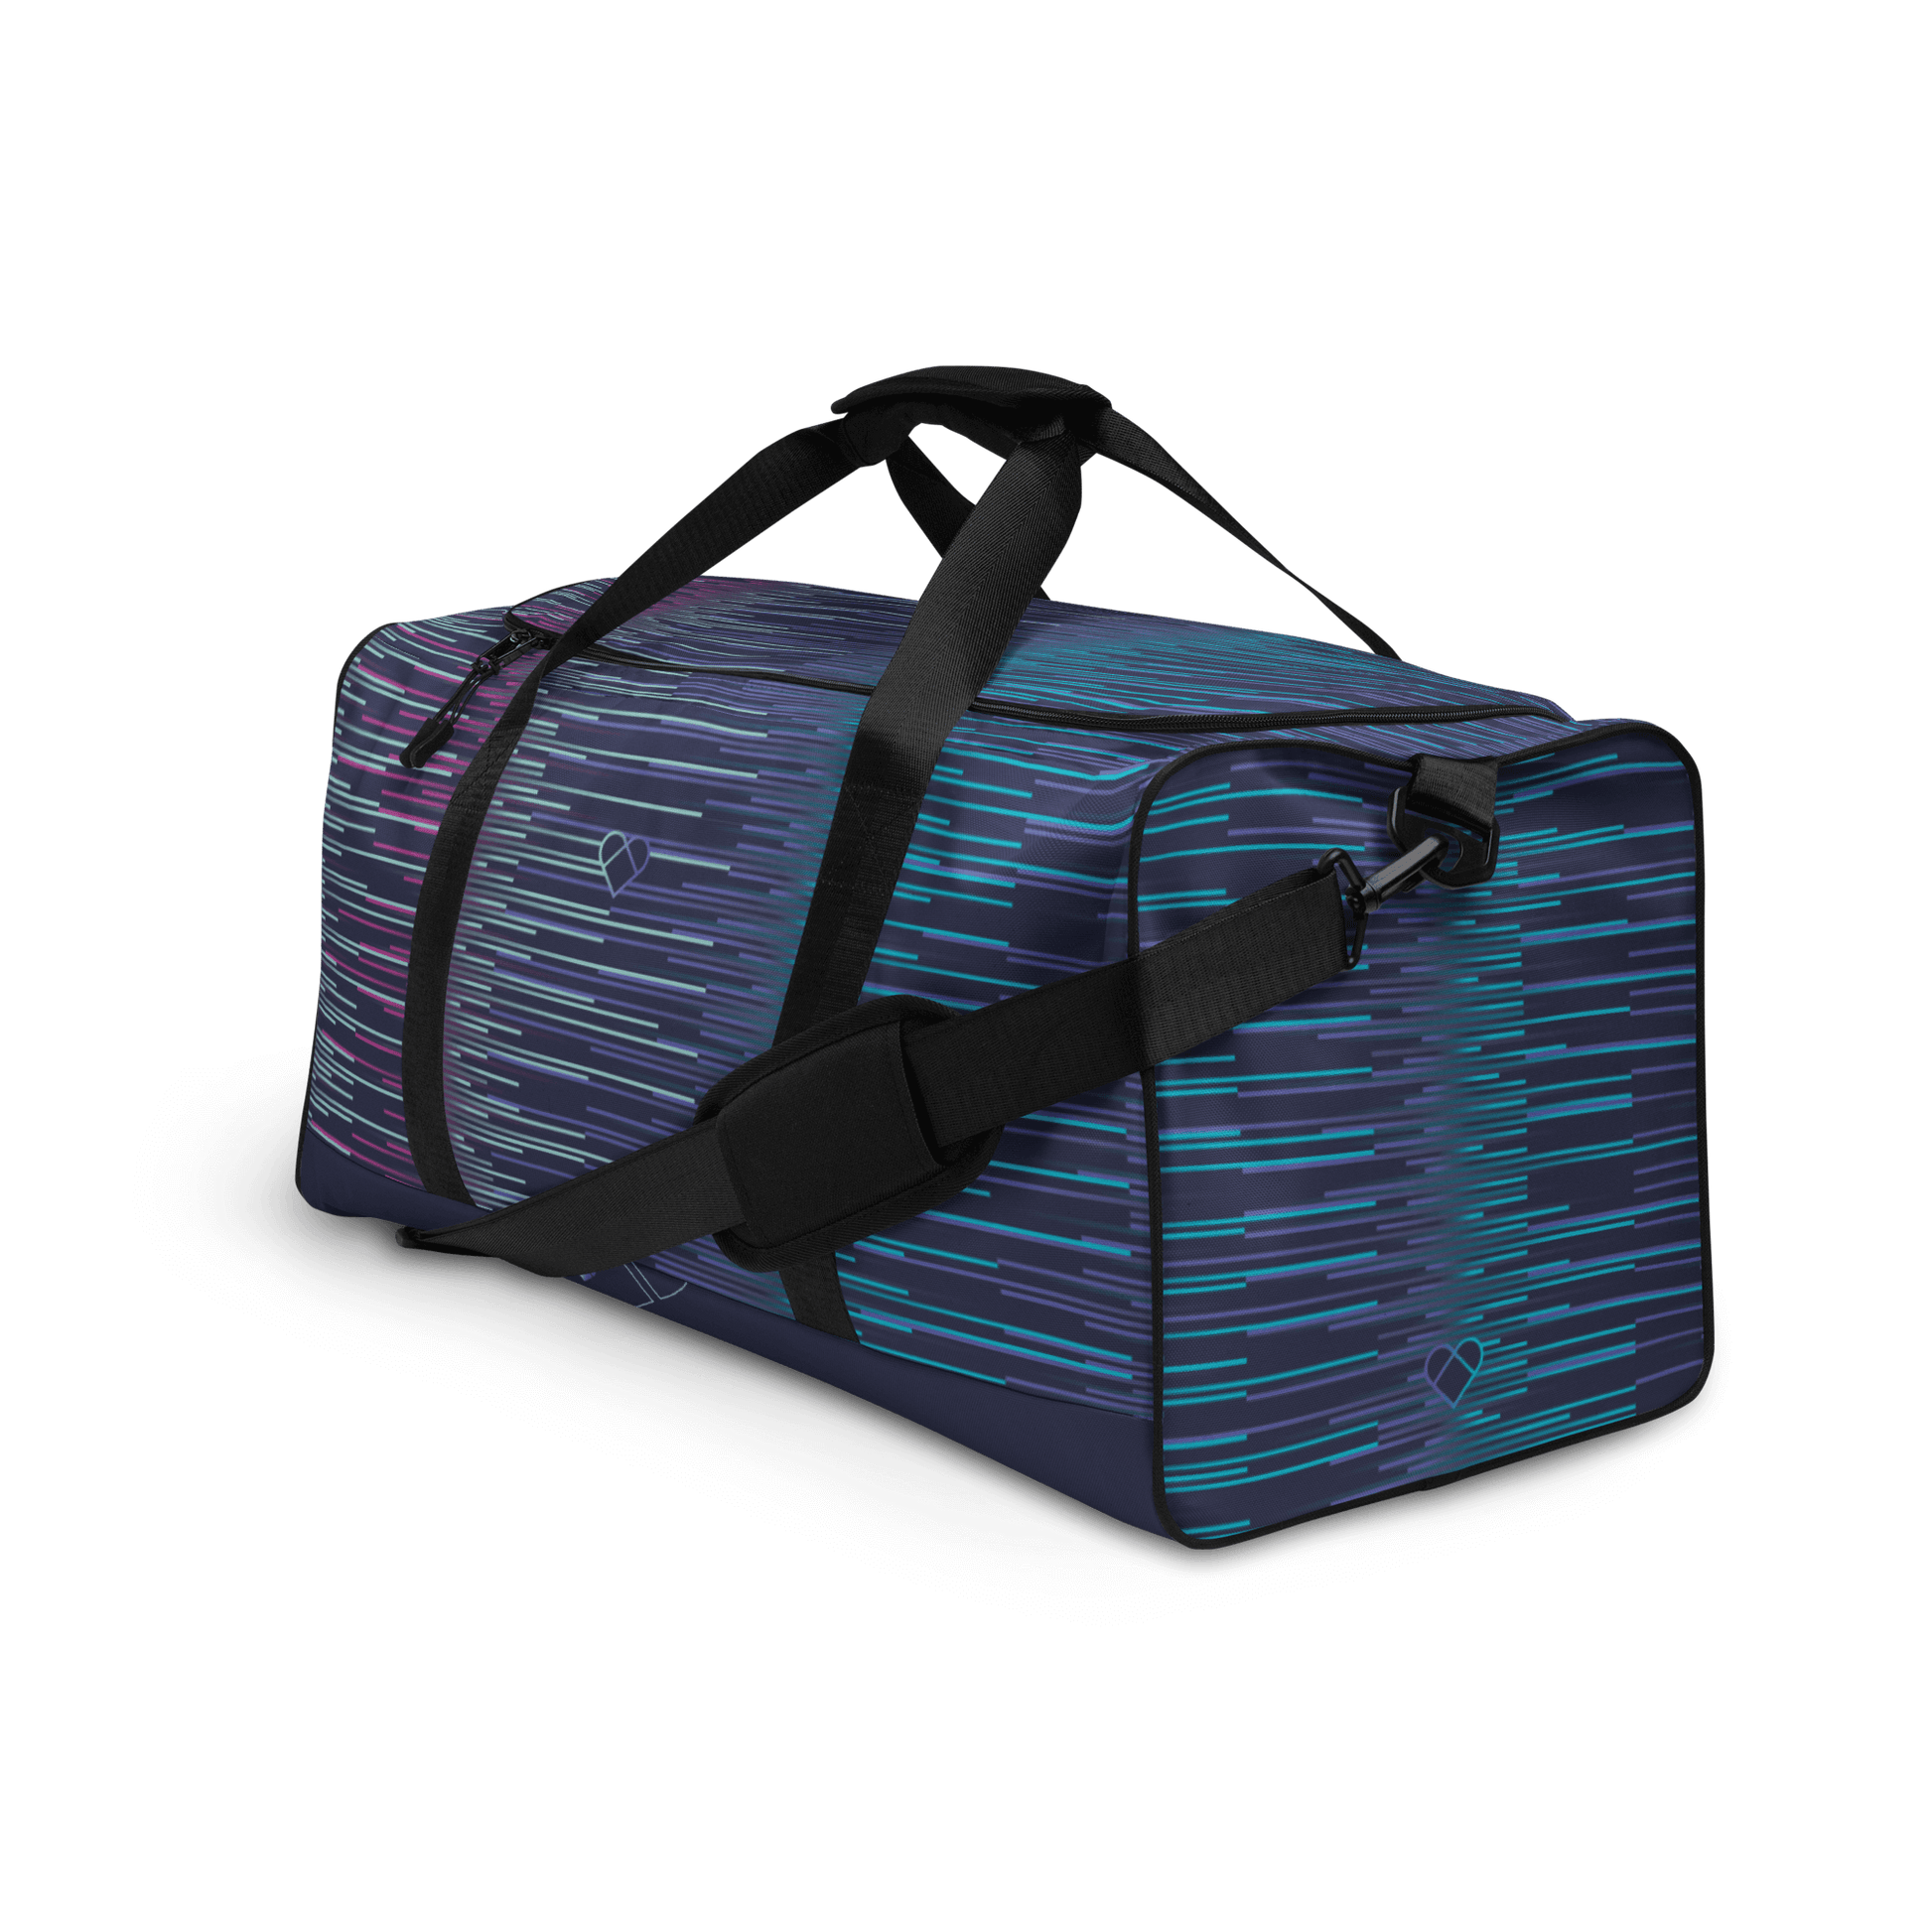 Unisex Fashion Duffle from Amor Dual Collection